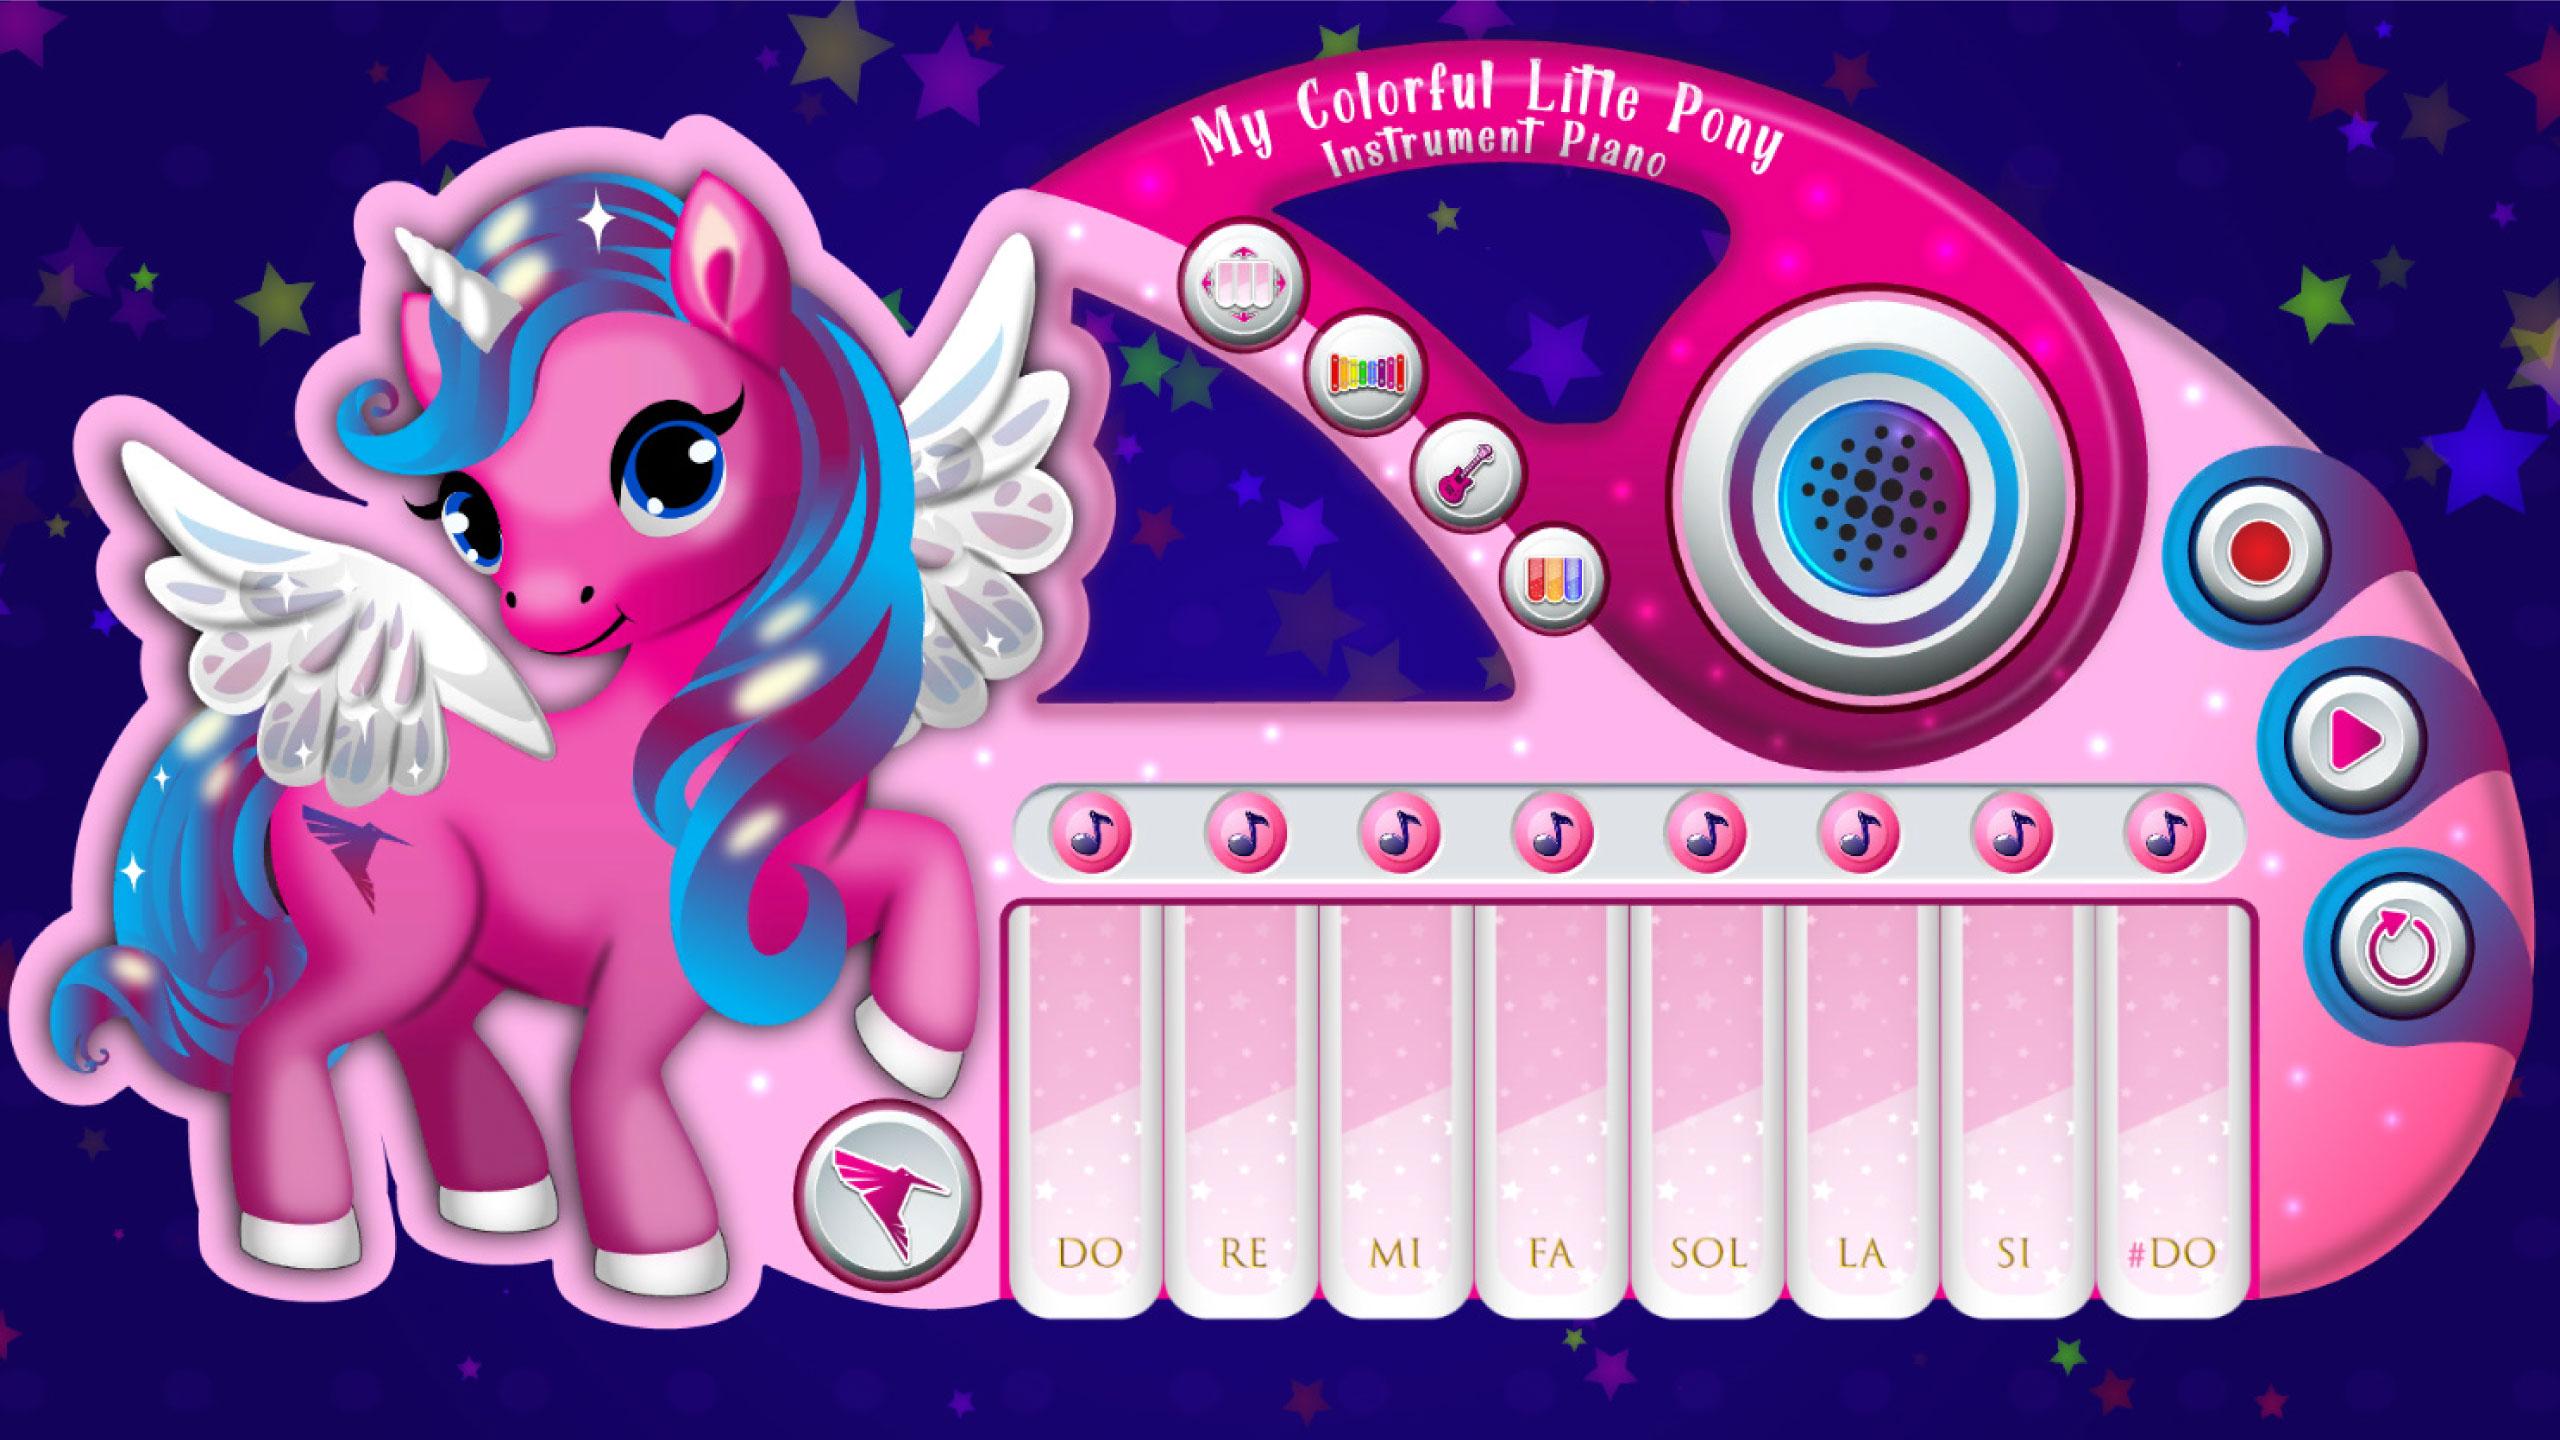 My Colorful Litle Pony Instrument - Piano 2.0 Screenshot 1